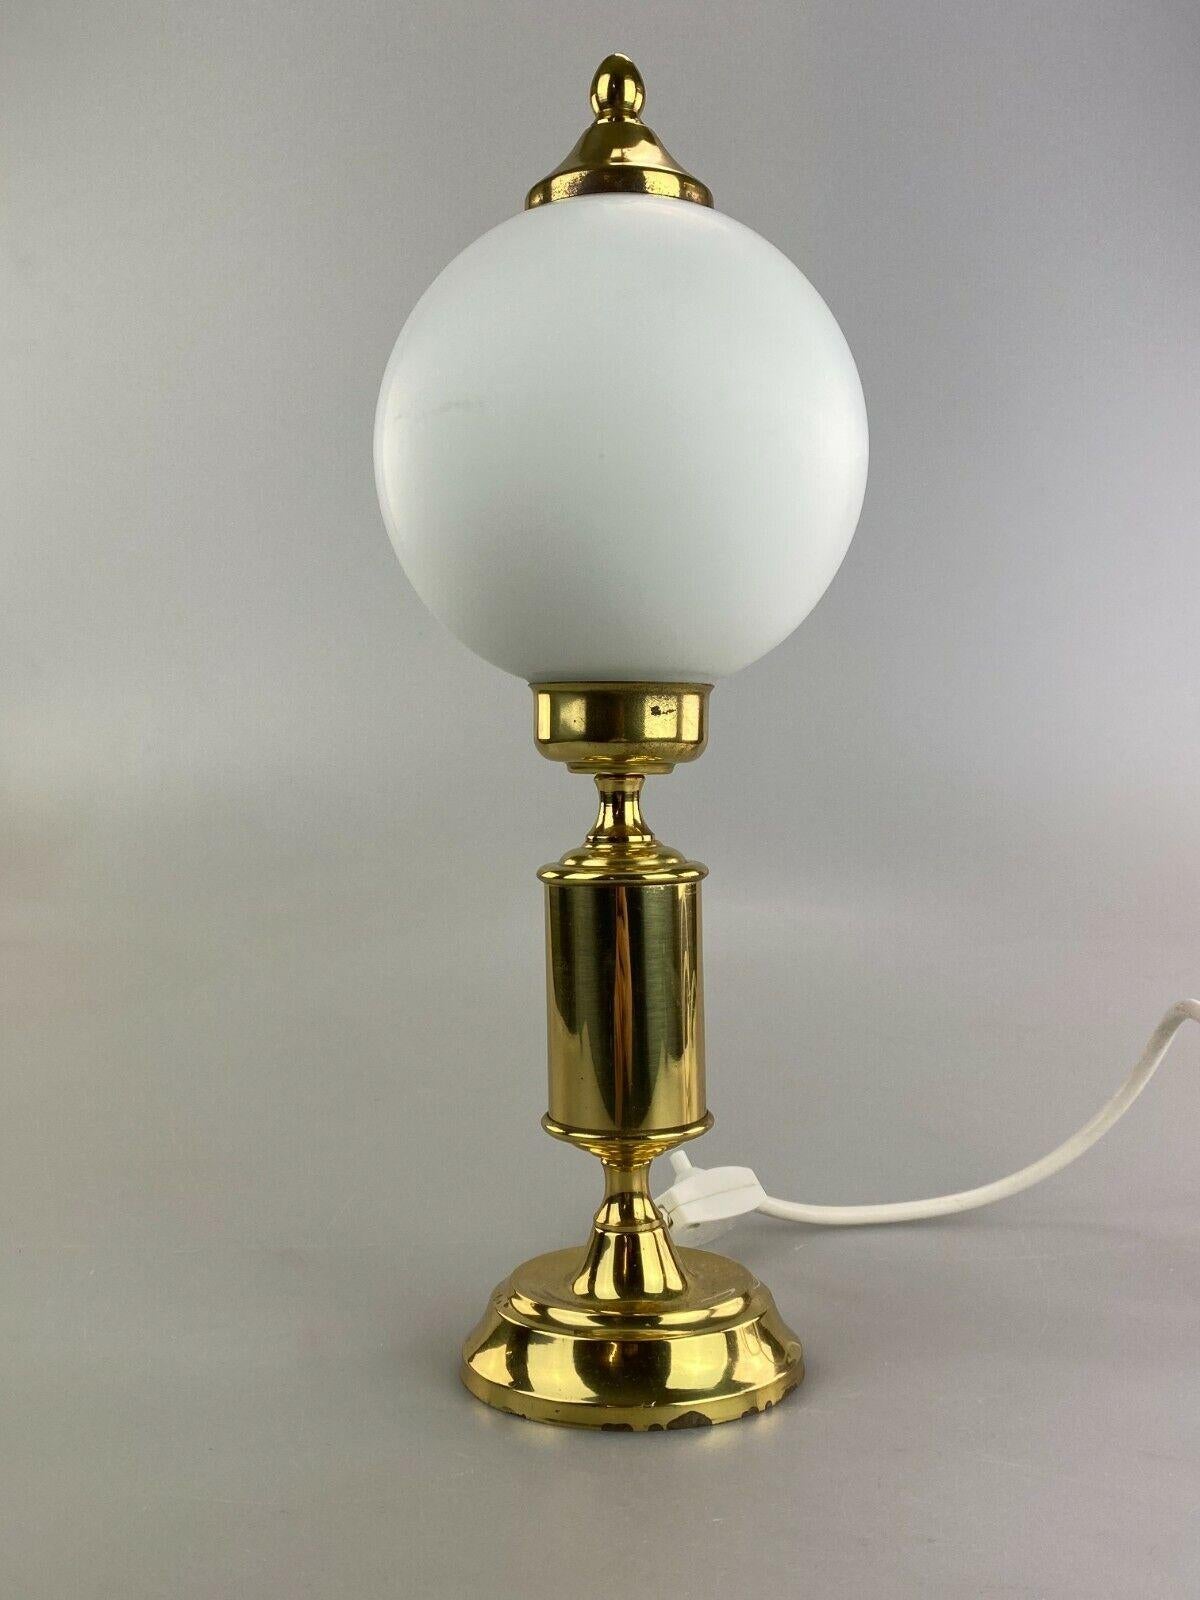 German 60s 70s Ball Lamp Light Table Lamp Bedside Lamp Space Age Design For Sale